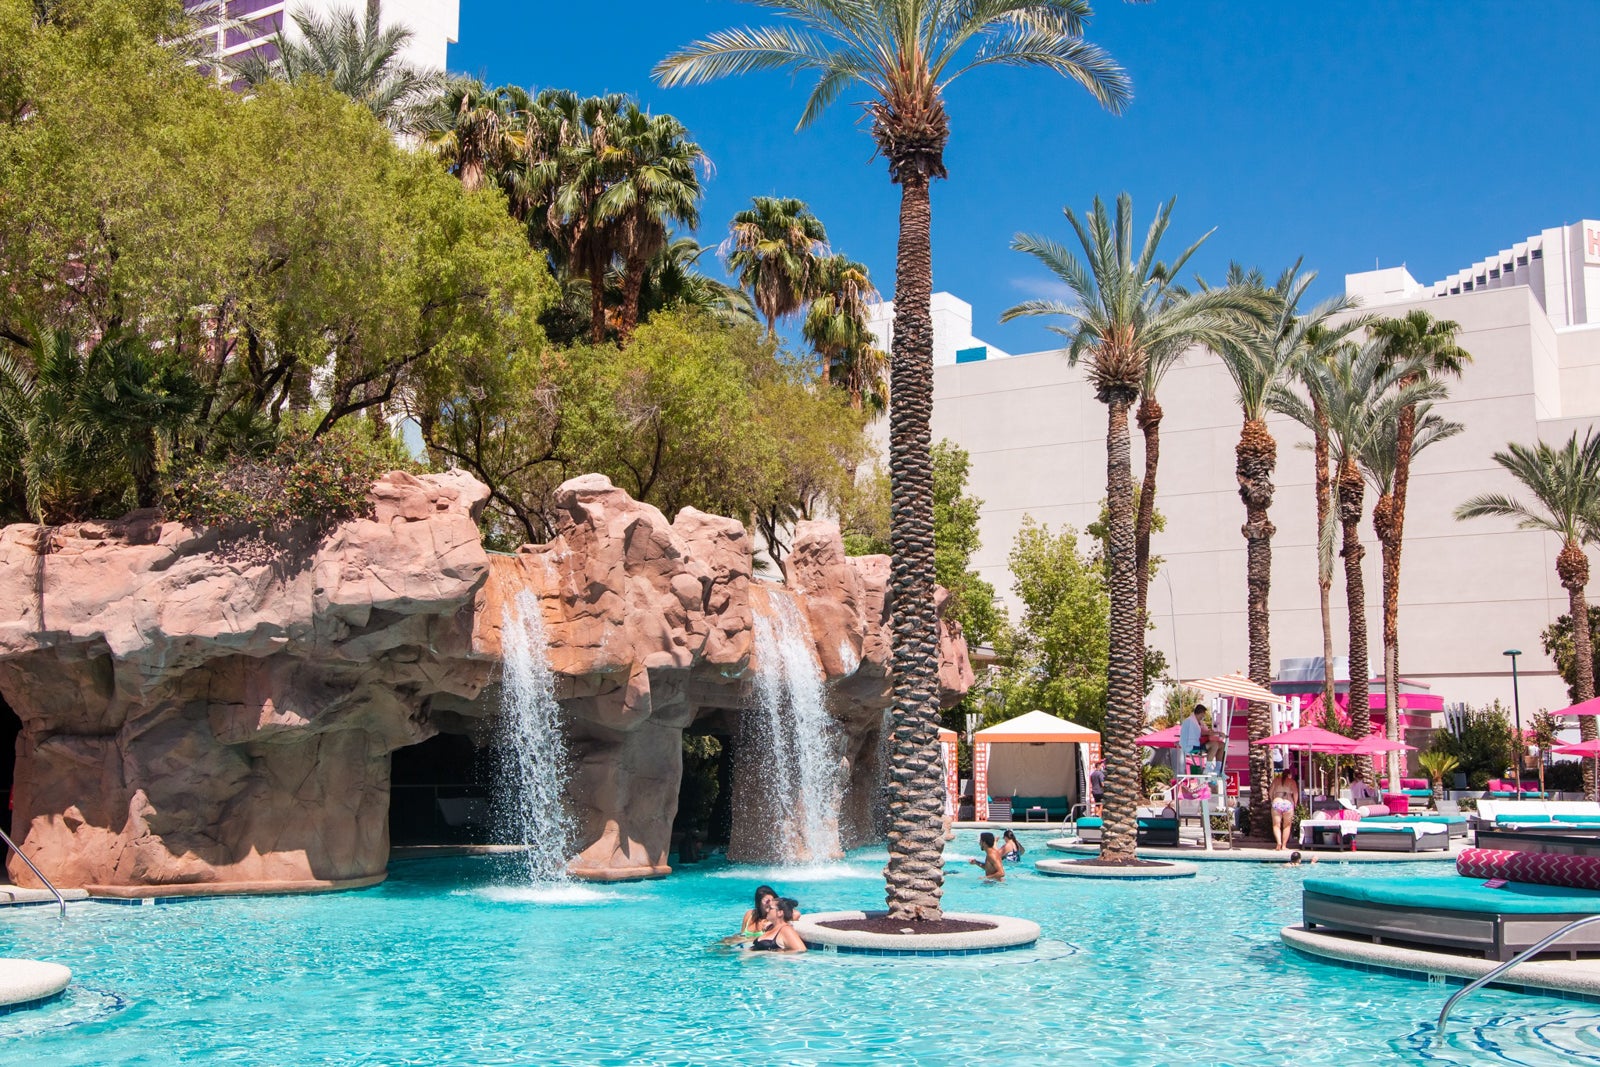 7 Las Vegas Hotel Pools That Will Whisk You To Another Country